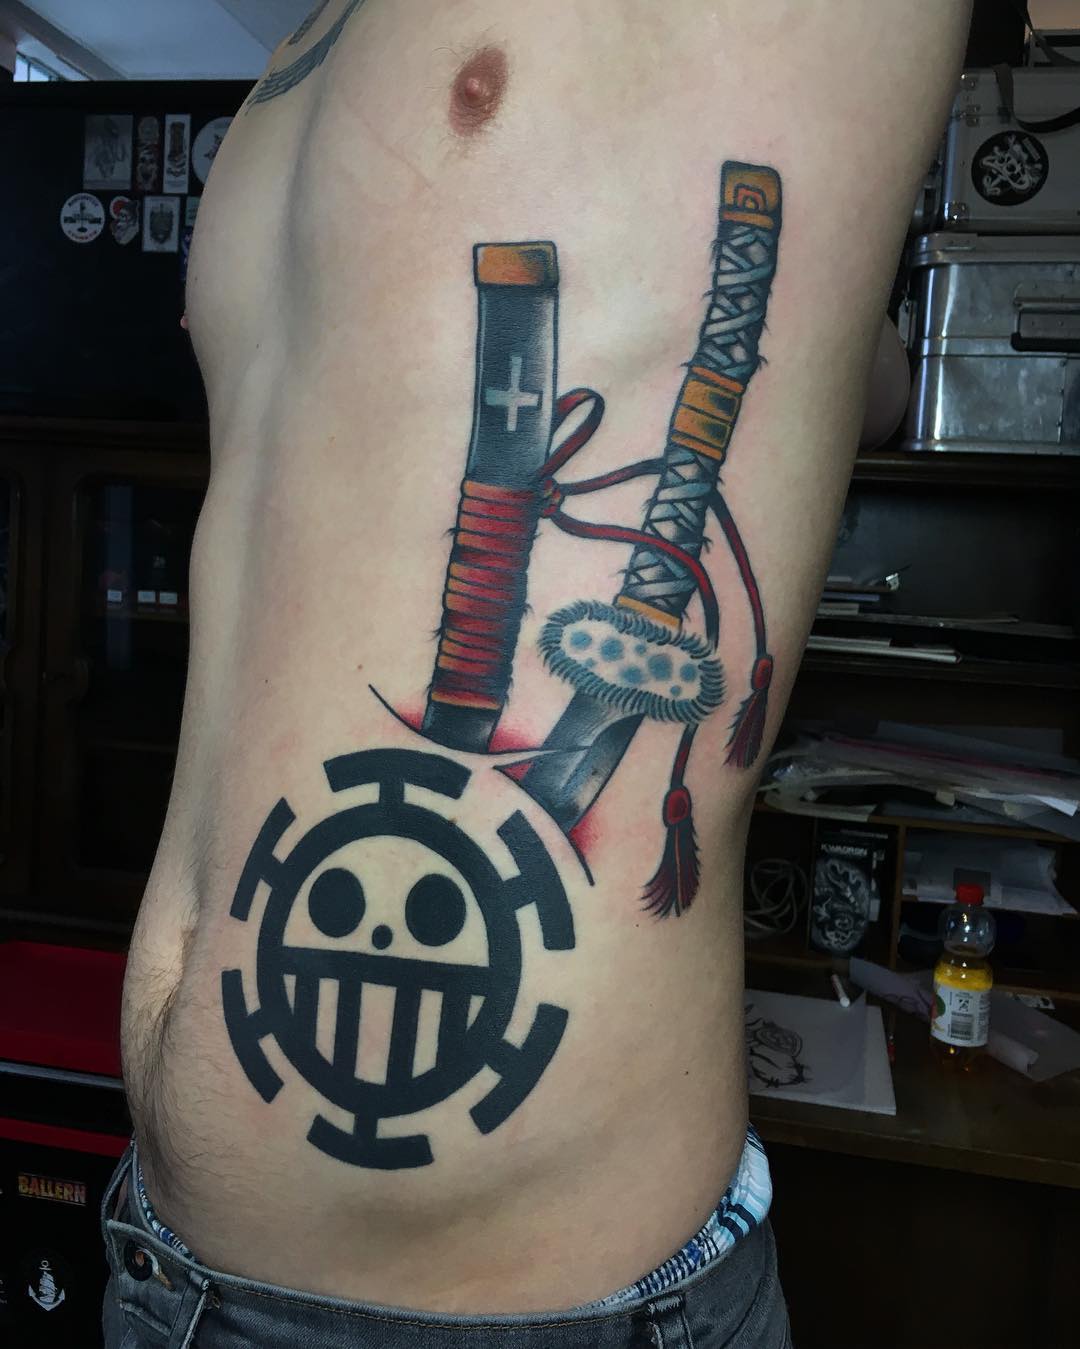 54+ Trafalgar Law Tattoo Designs You Need To See! - Heart Pirates Jolly Rogers AnD Trafalgar D Water Law Weapons Set Tattoo